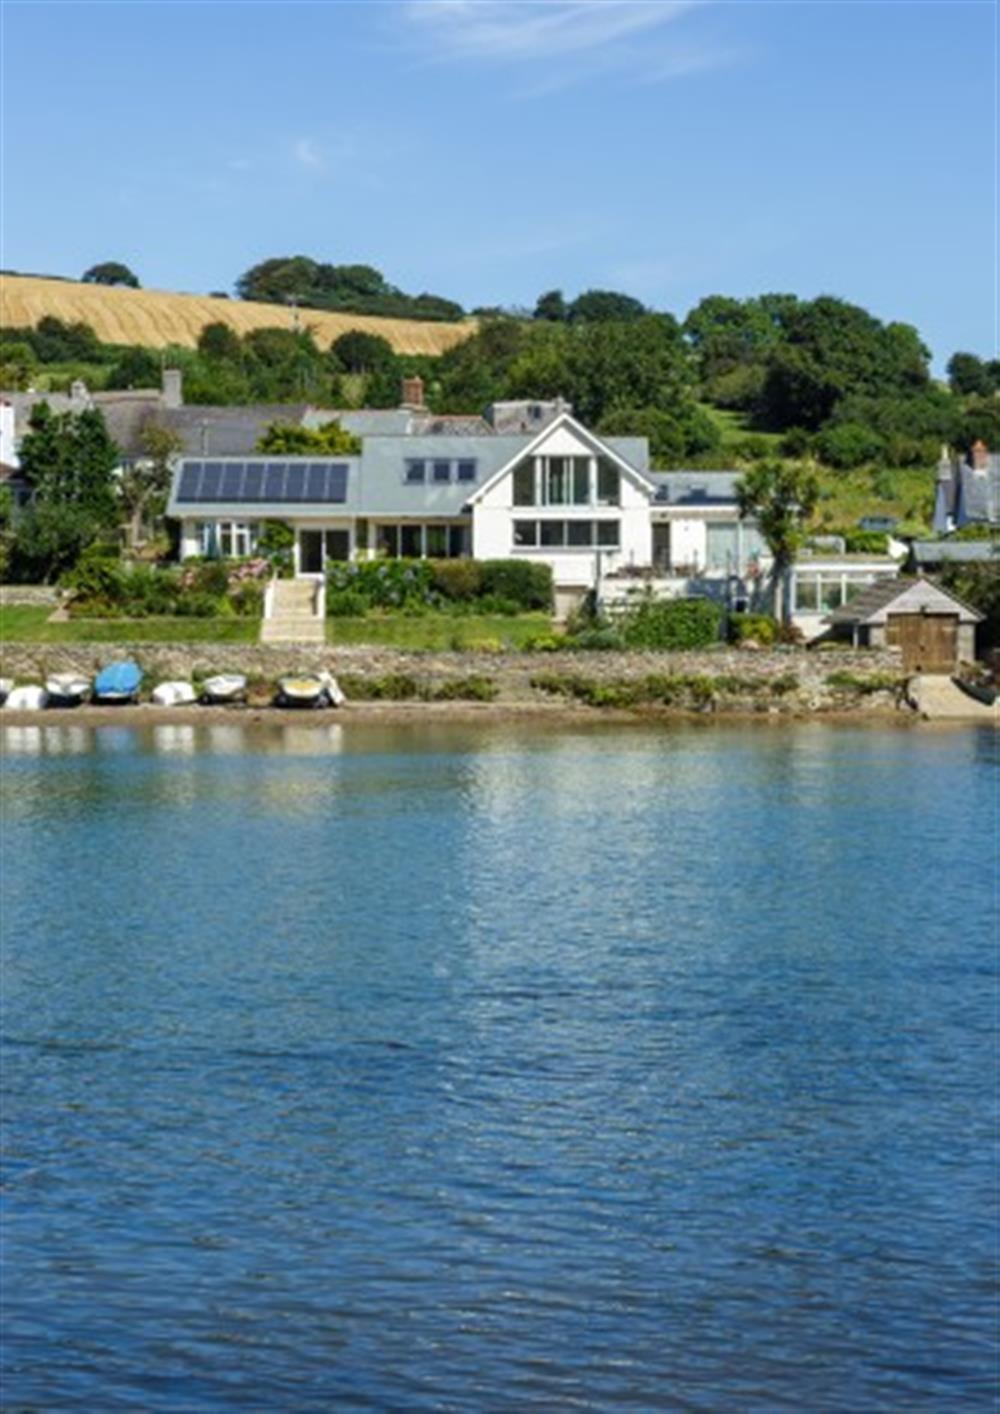 Dog friendly, water front, EV charging and sleeping 16! what a place to enjoy your holiday! at Seaflowers in Frogmore